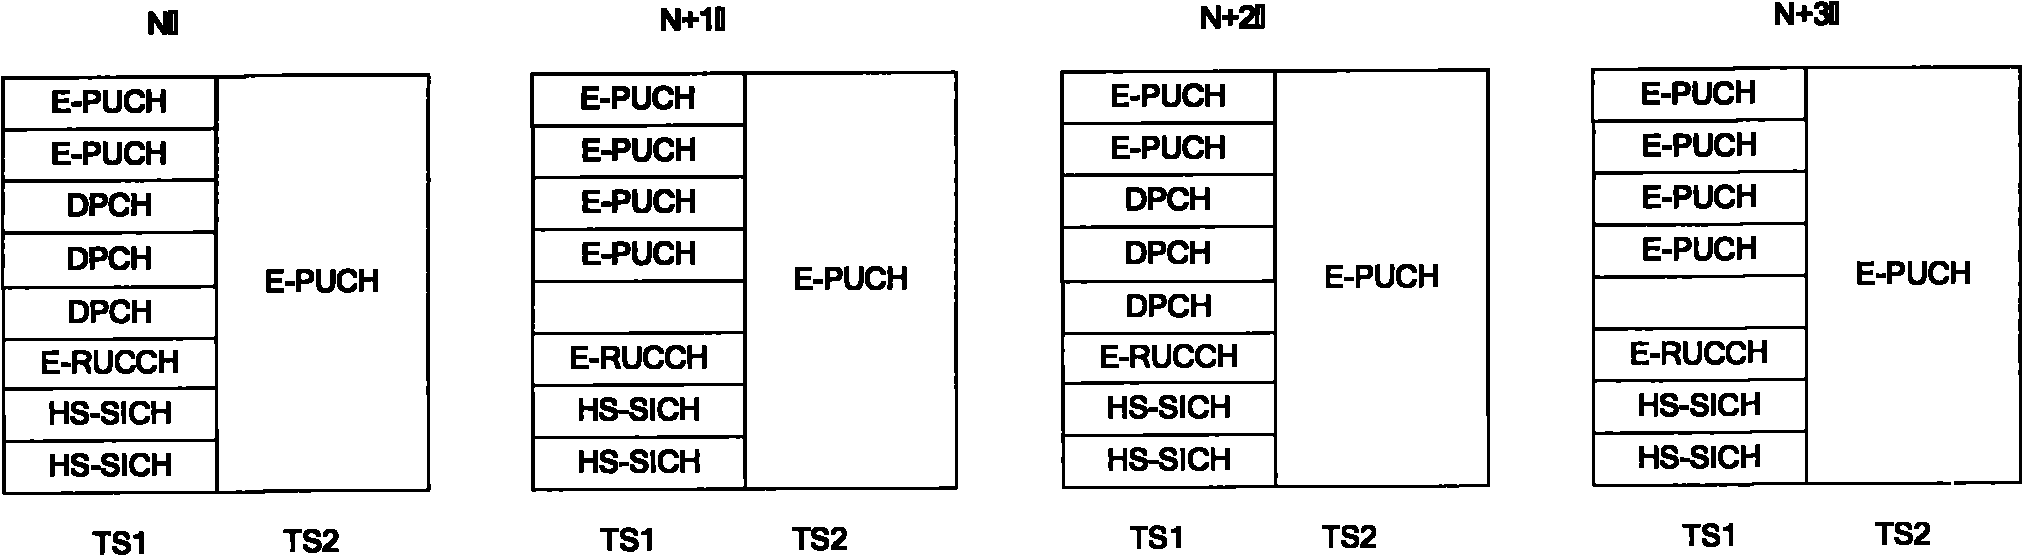 Enhanced high-speed packet access scheduling method and device